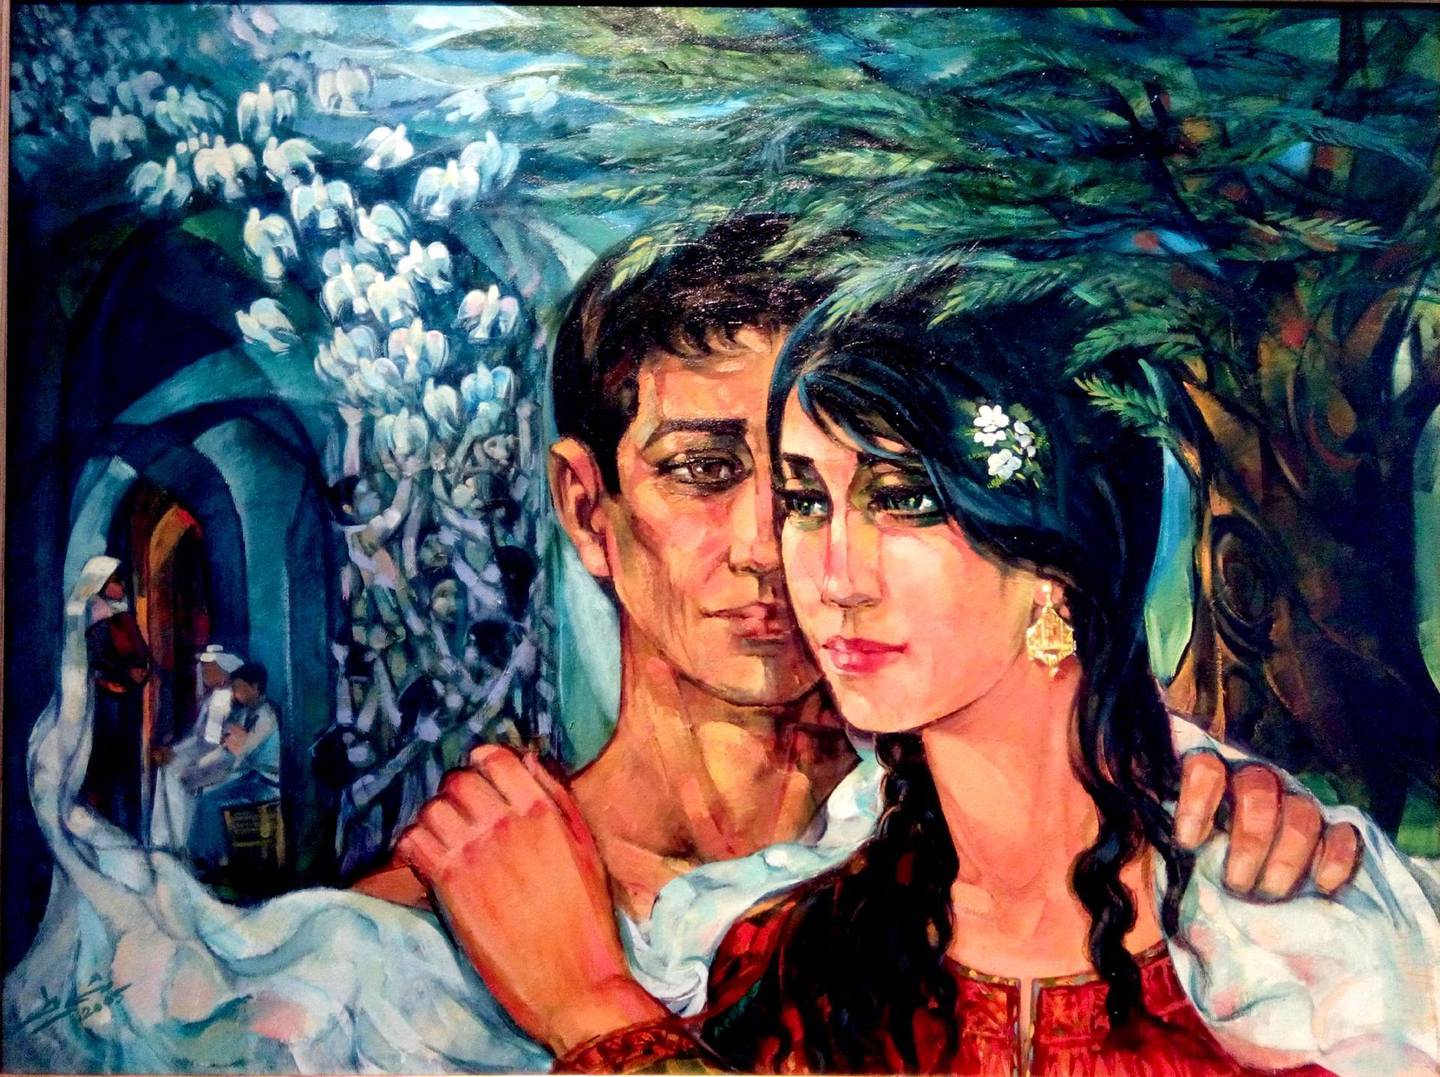 Ismail Shammout's "Love and Dream," painted two years before his death 